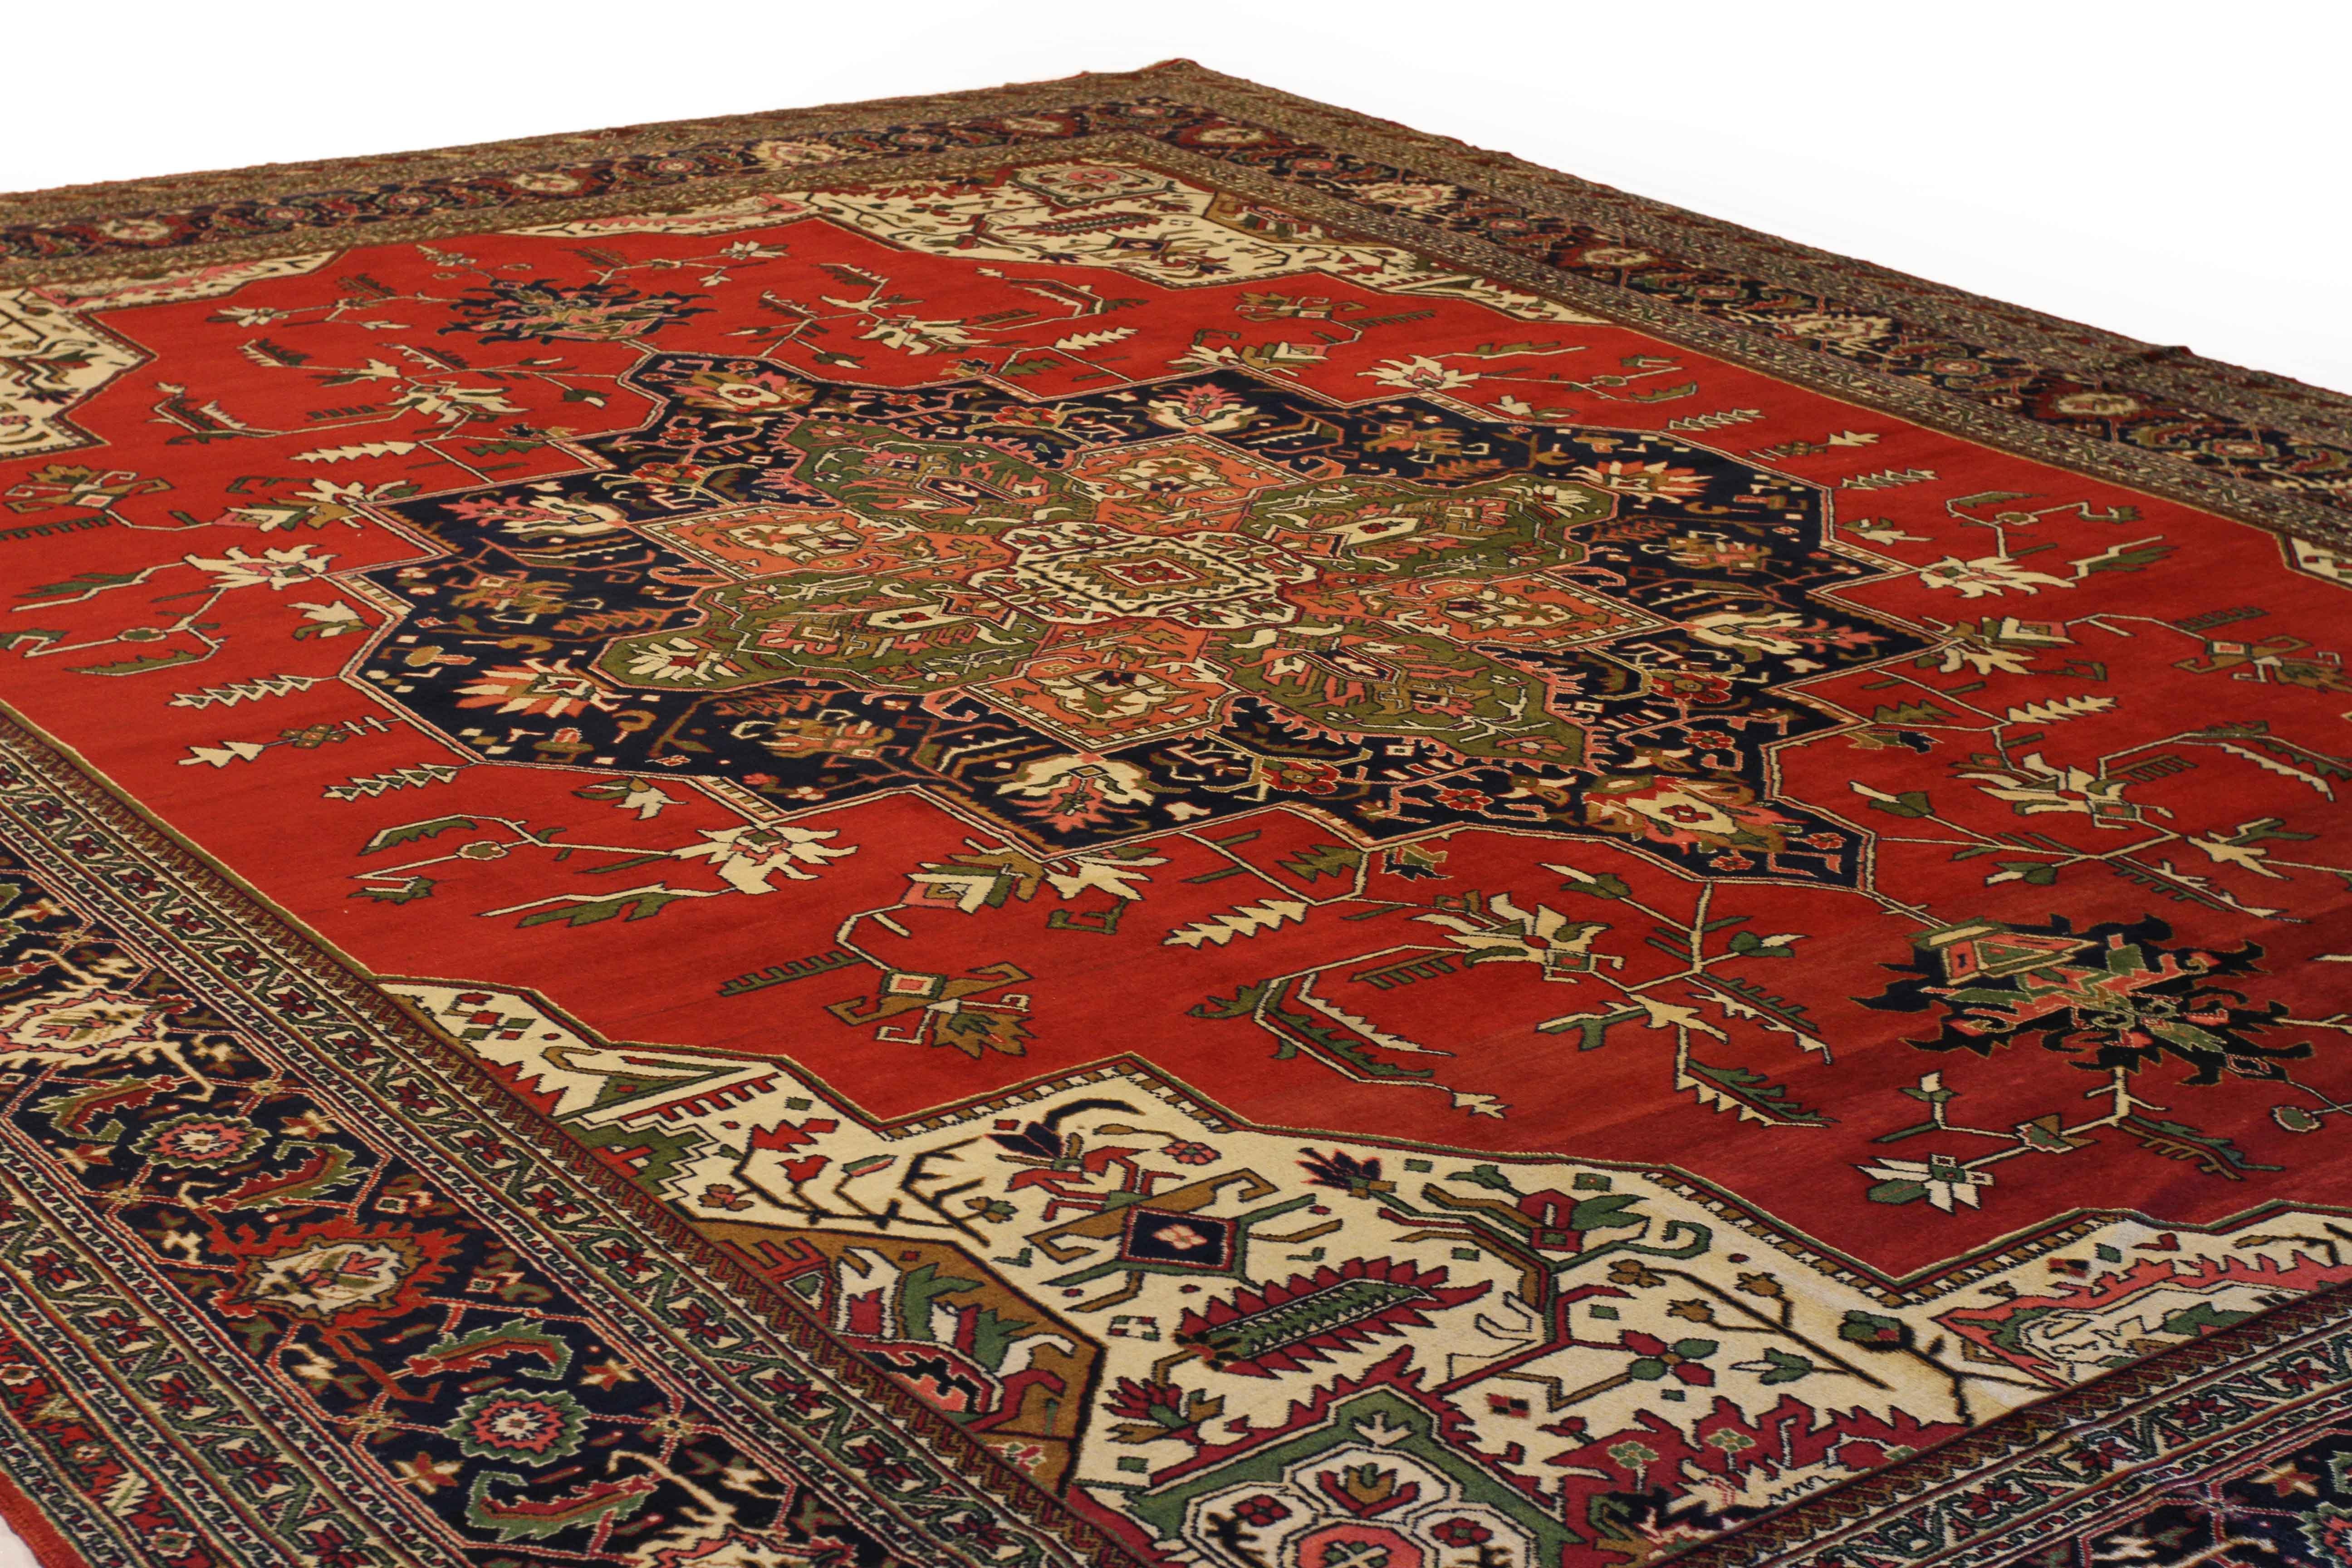 Mid-20th Century Hand-Woven Persian Rug Tabriz Design In Excellent Condition For Sale In Dallas, TX